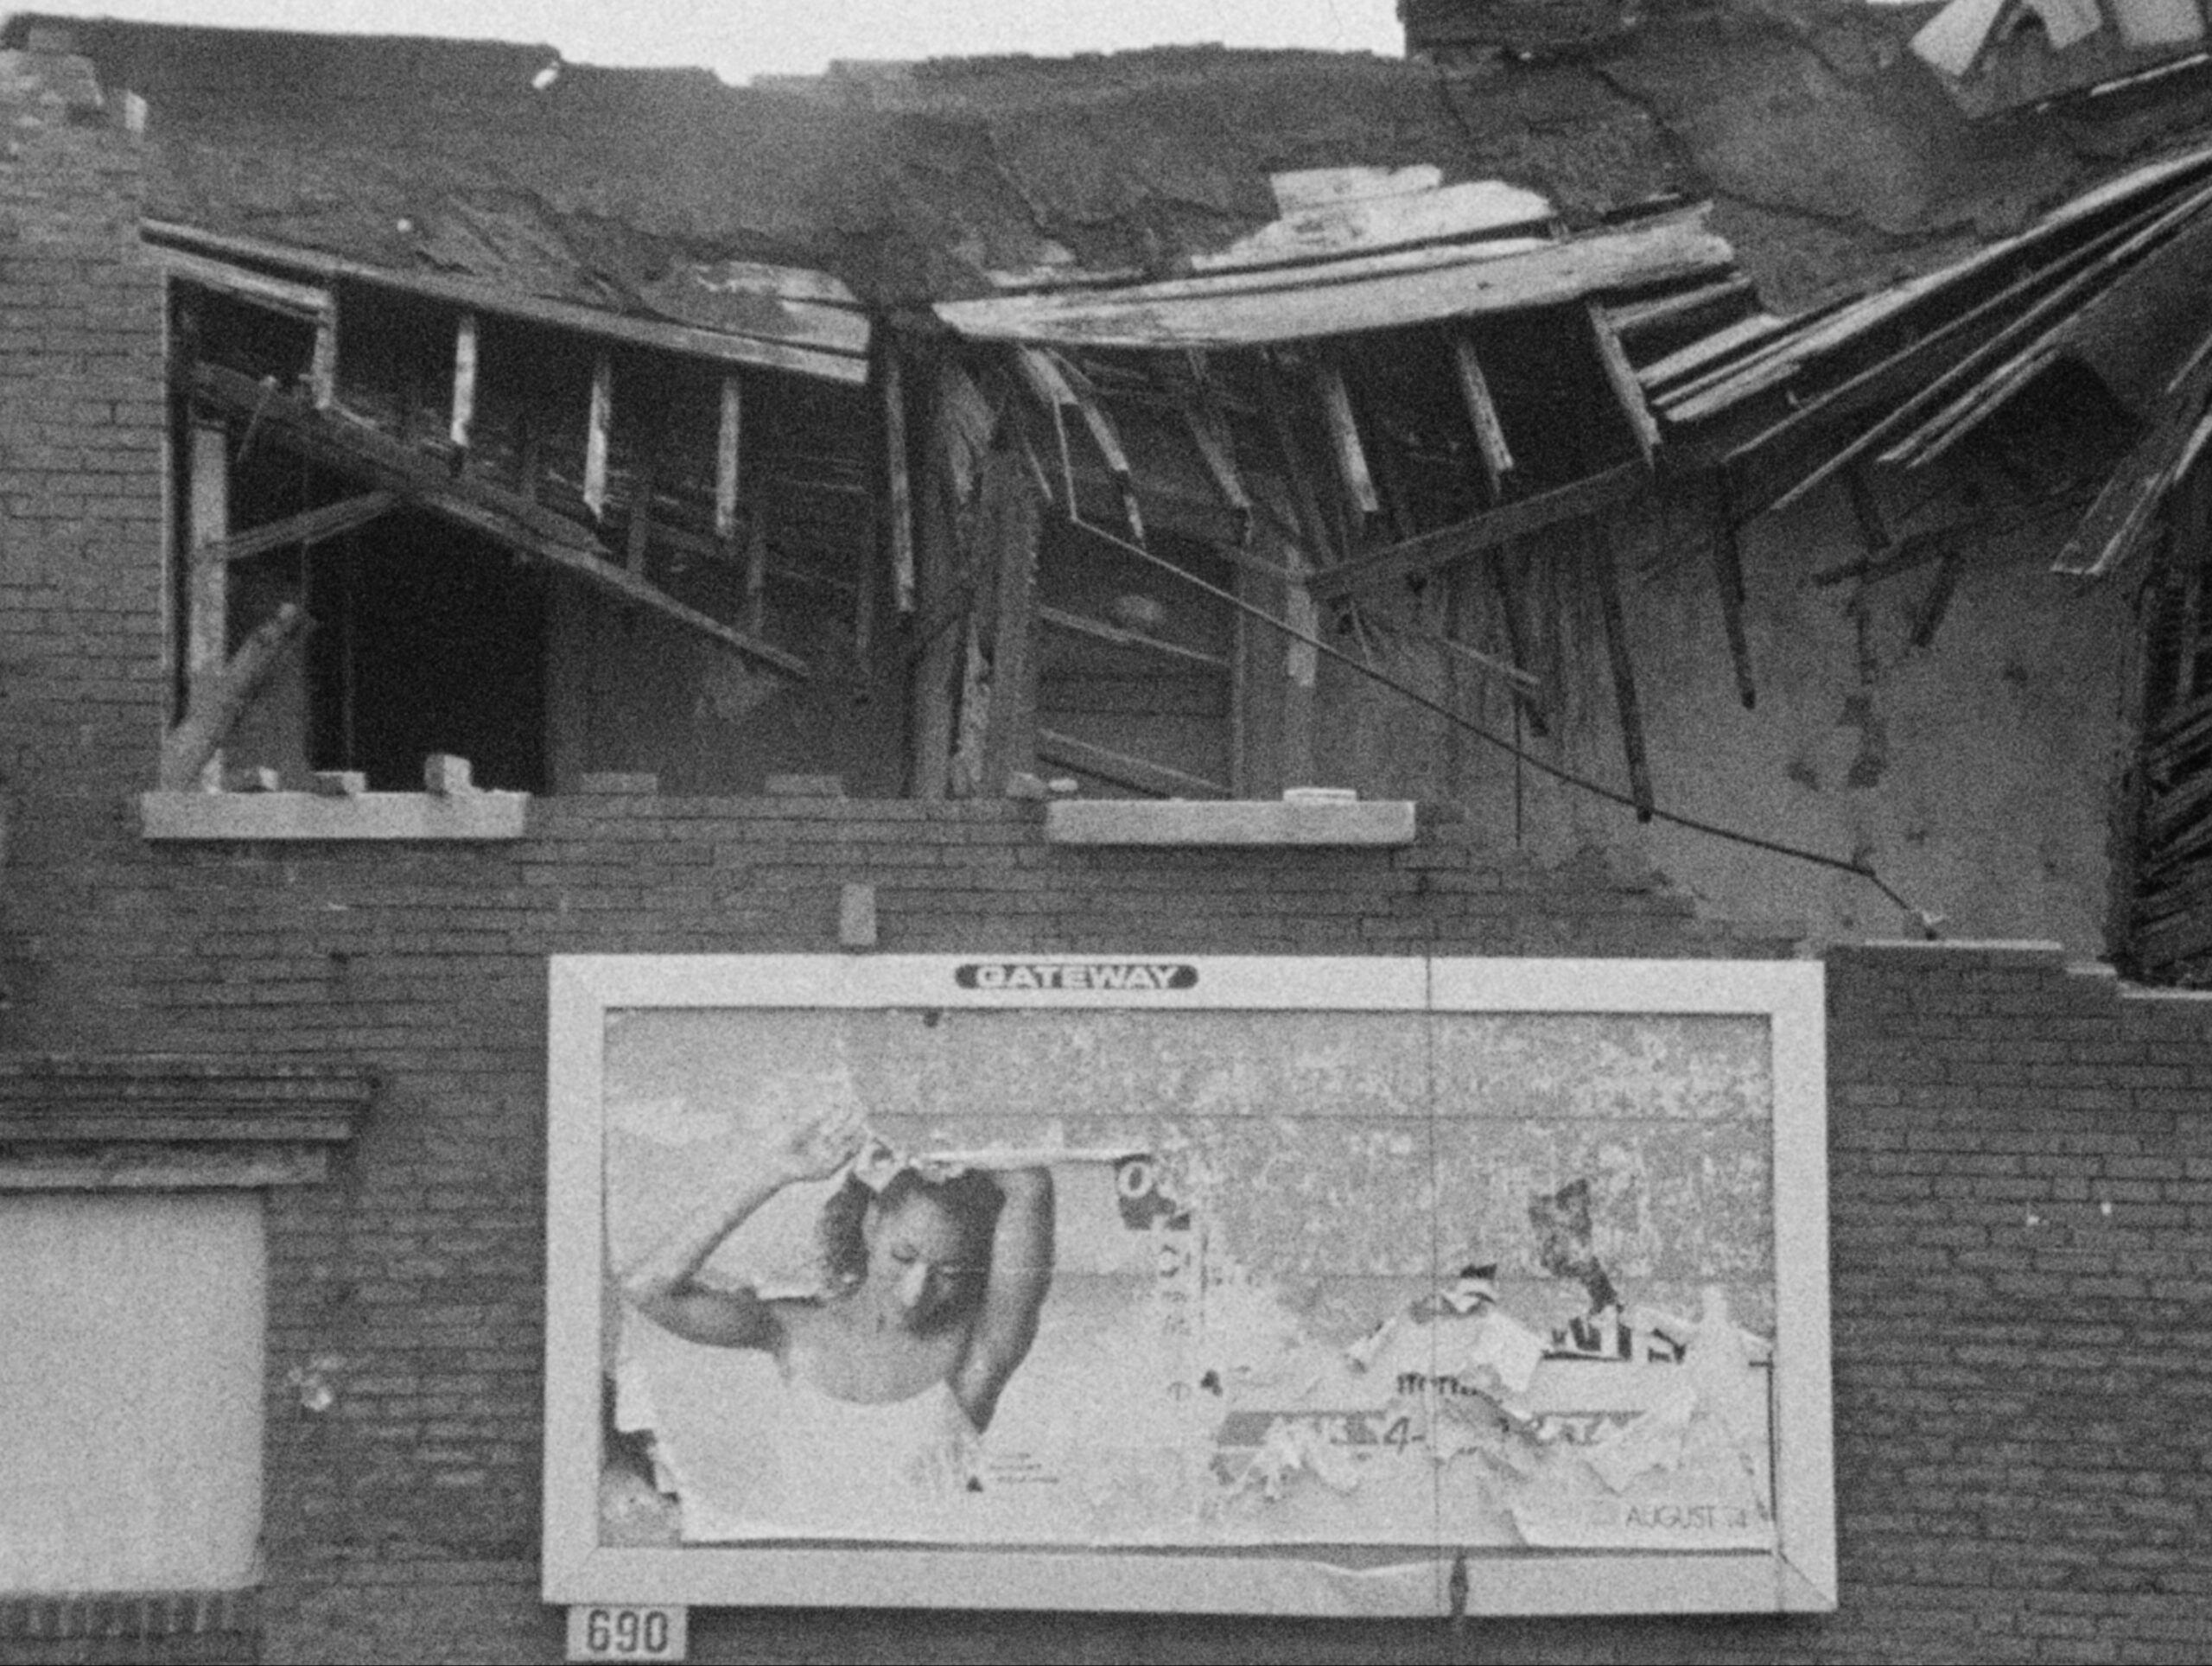 Black and white film still of brick building with roof caving in and tattered billboard.